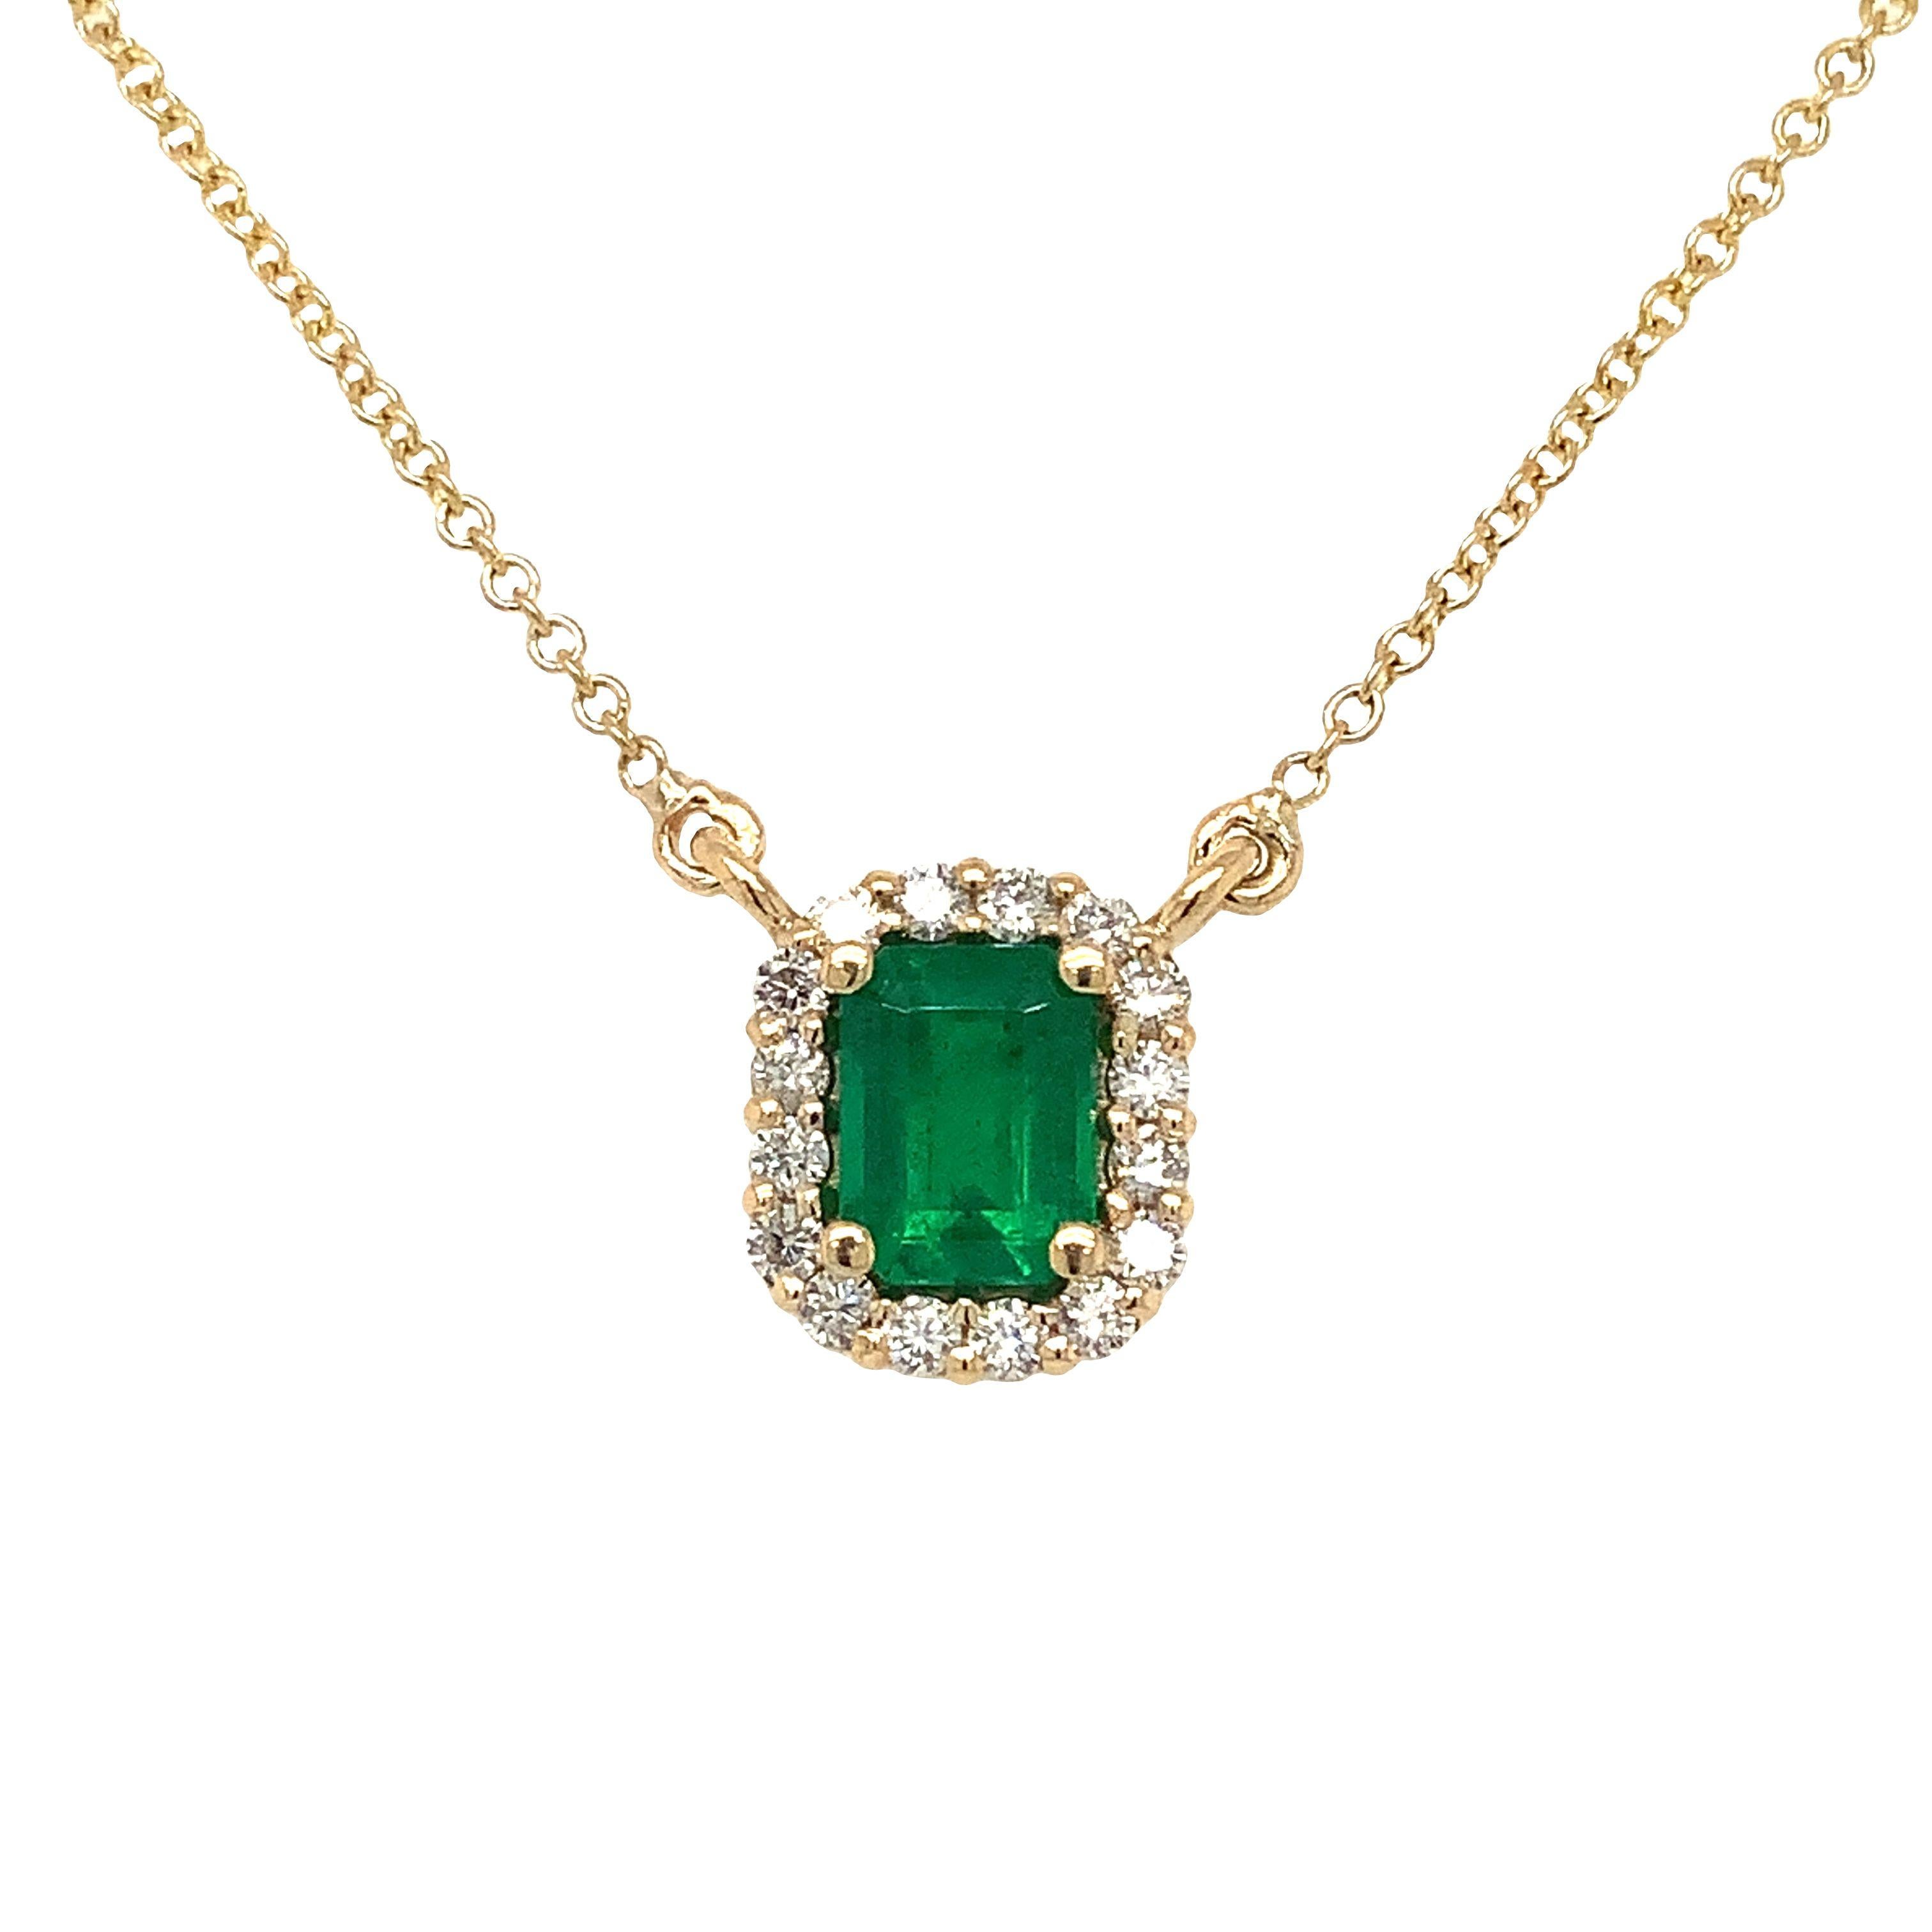  This exquisite necklace set is crafted from luxurious 18K yellow gold, showcasing a Colombian Emerald Cut Emerald of 1.07 cts. and a medium to dark green hue. Complemented by 16 Round Brilliant Cut Diamonds of 0.31 cts, G color, and VS2 clarity,